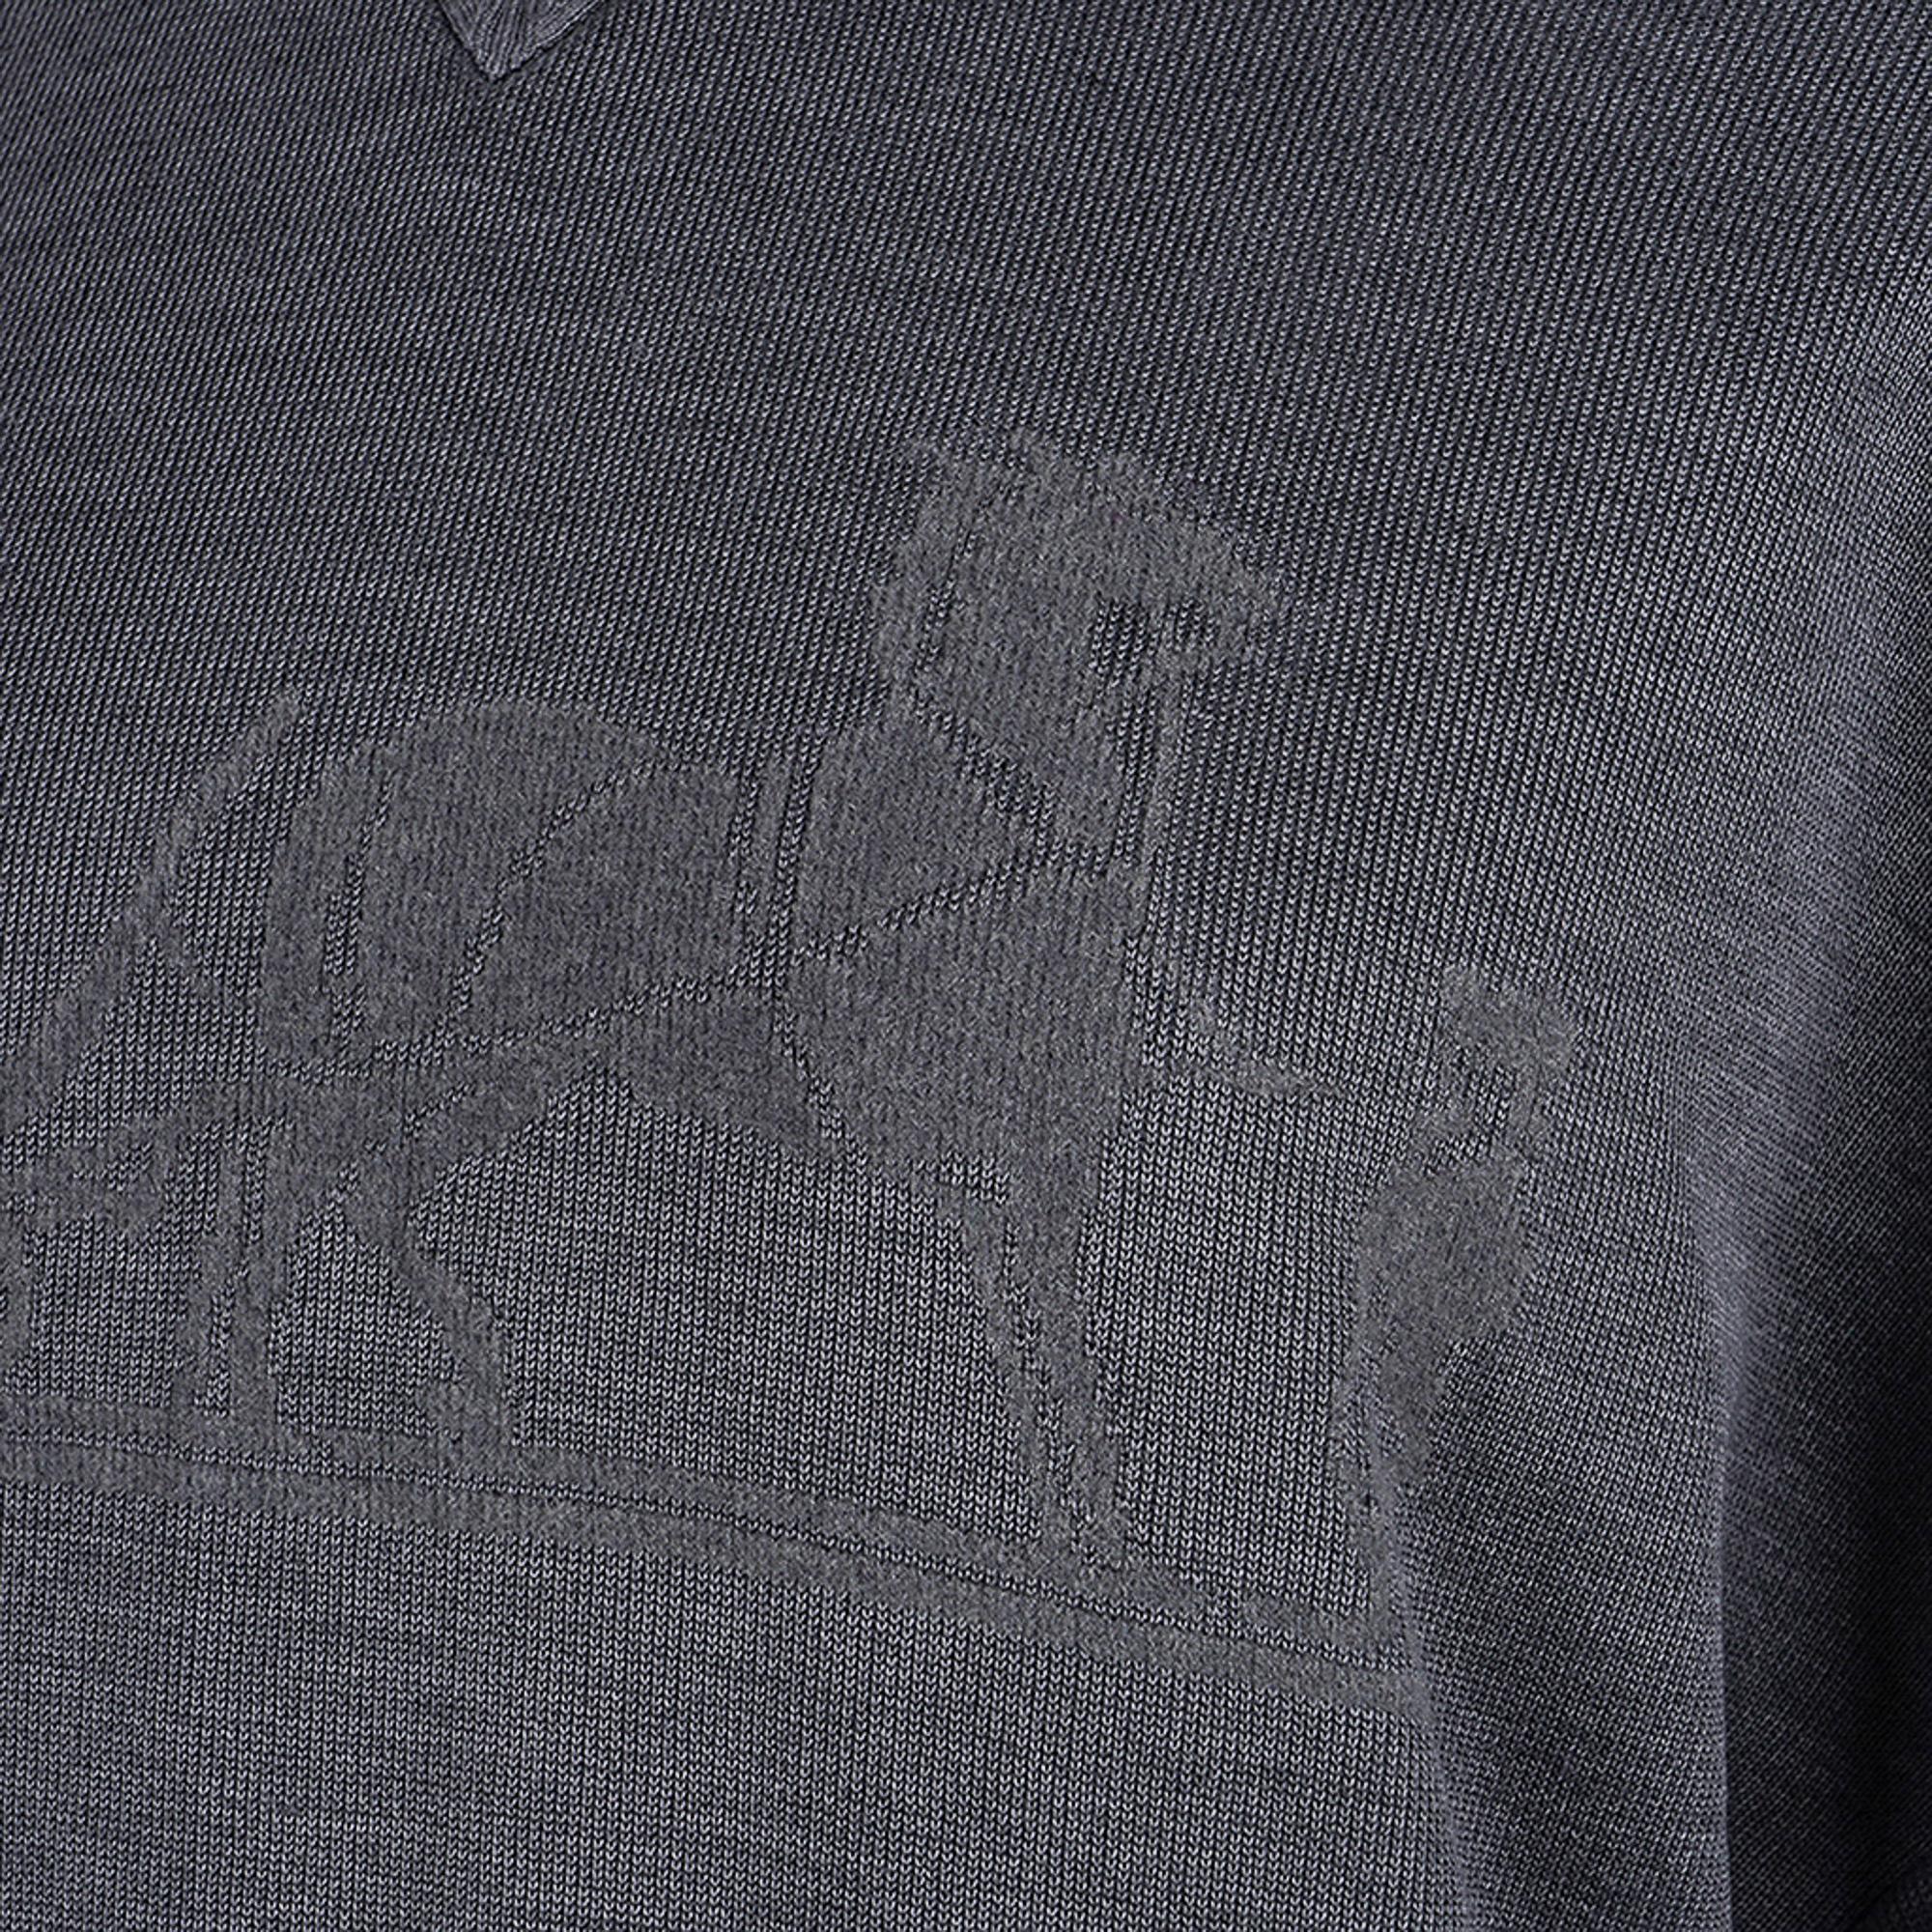 Mightychic offers an Hermes Ex-Libris sweater featured in Gray.
Slight drop shoulder, crewneck wool knit in a flattering shade of silvery Gray.
The iconic Ex-Libris subtly woven in.
No longer produced, this fabulous piece is a great find!
Ribbing at